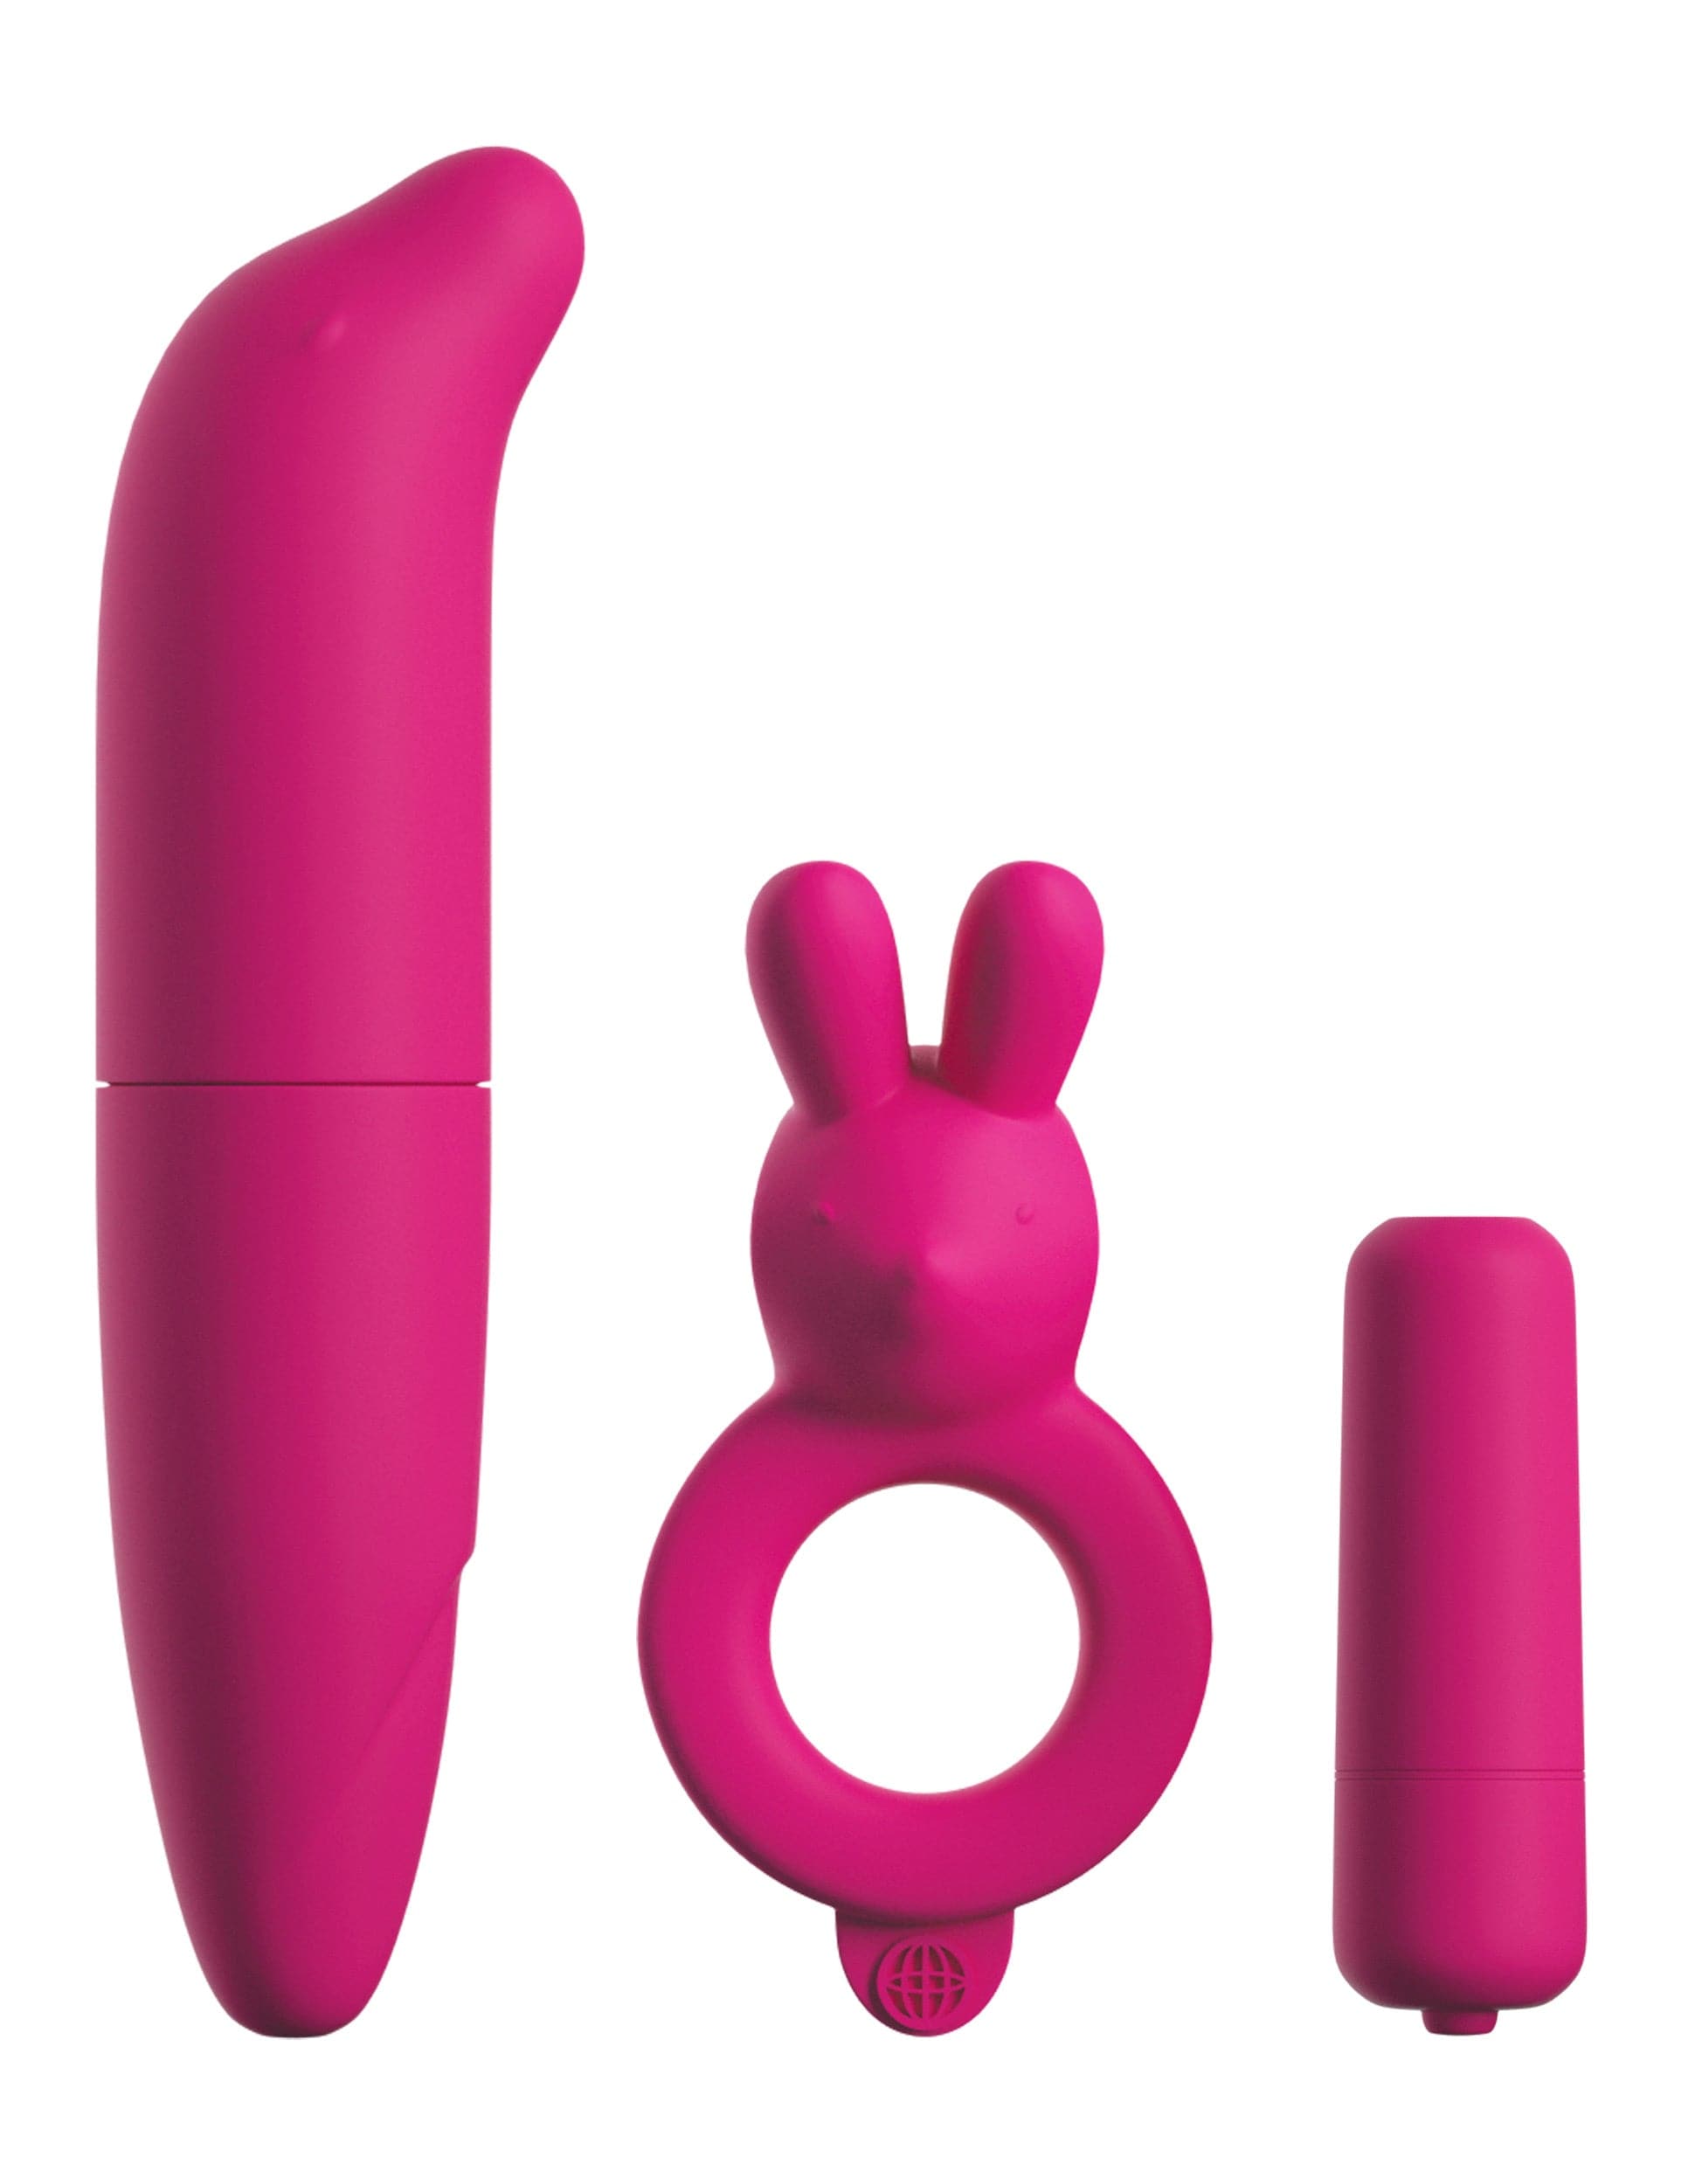 couples sex toys, sex toys for couples